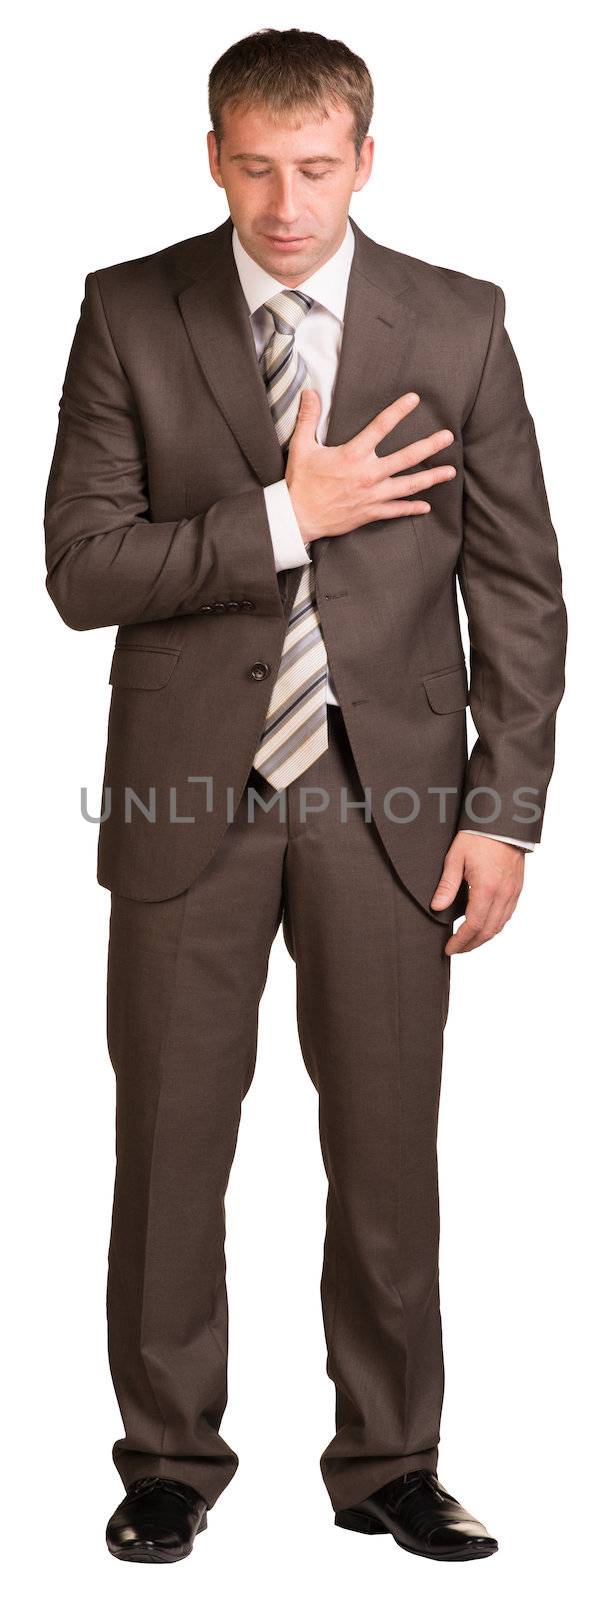 Businessman holding his heart. Isolated on white background.